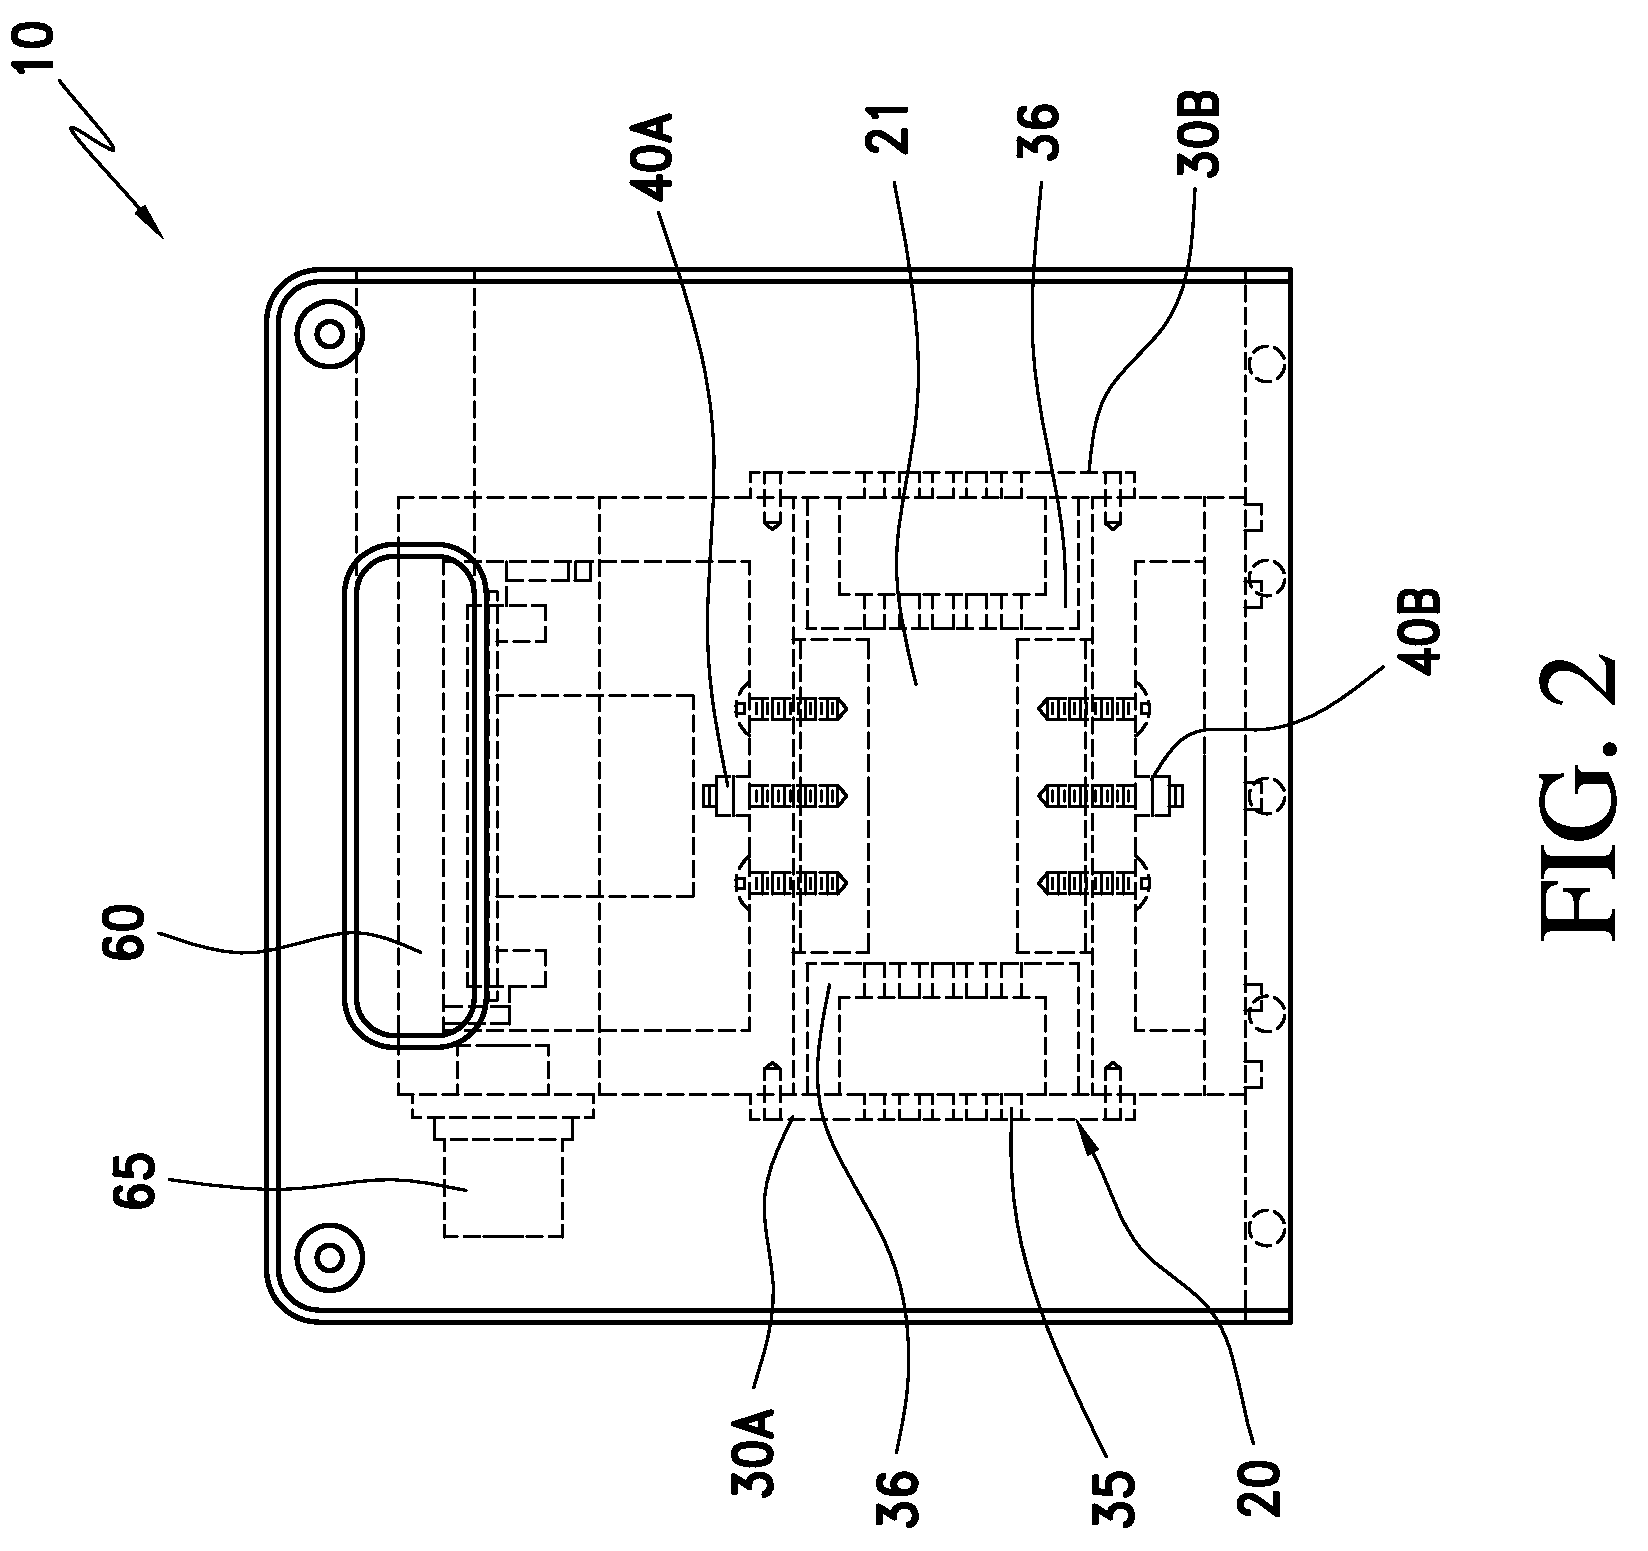 Submersible portable in-situ automated water quality biomonitoring apparatus and method